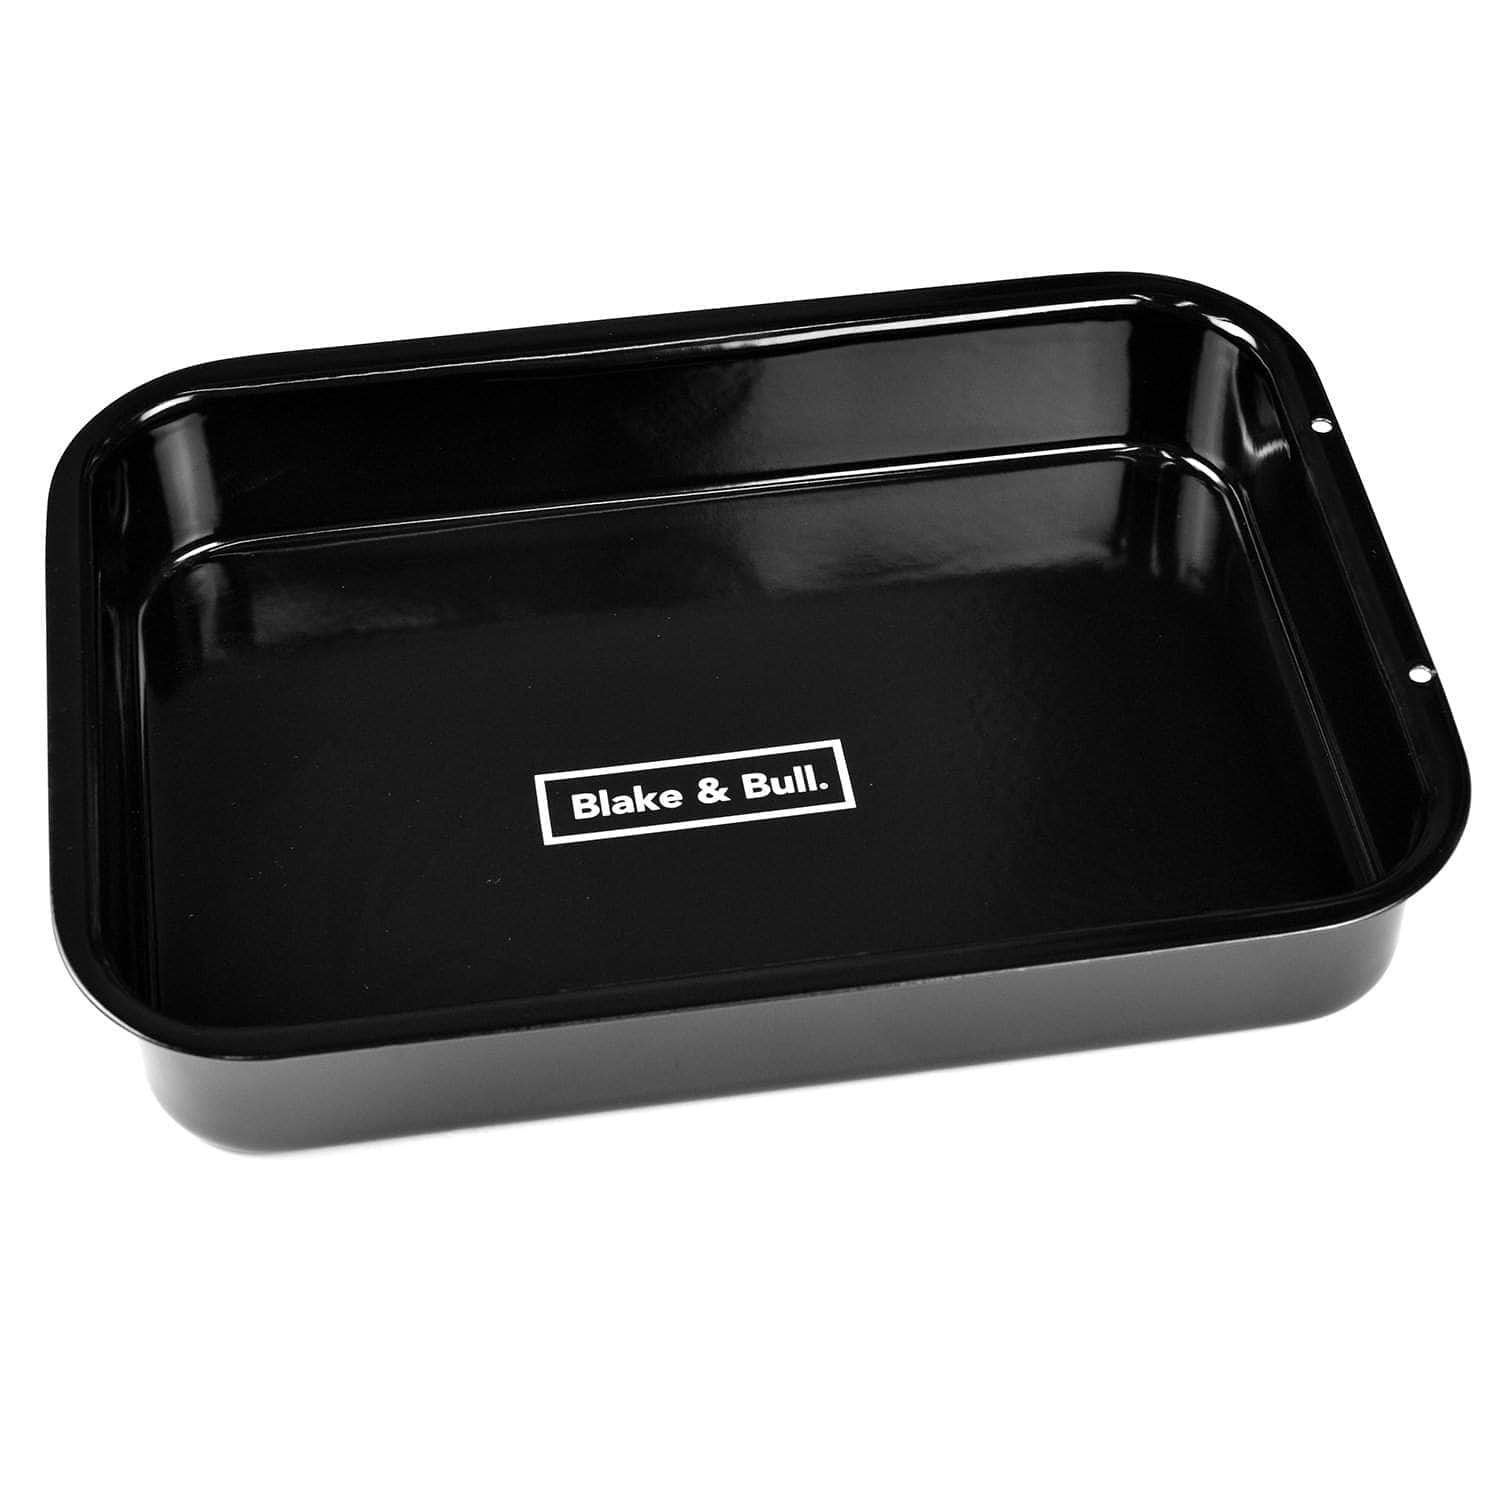 *Not quite perfect* 'Fits on runners' black enamelled roasting tin for use with Aga range cookers 'half oven' size